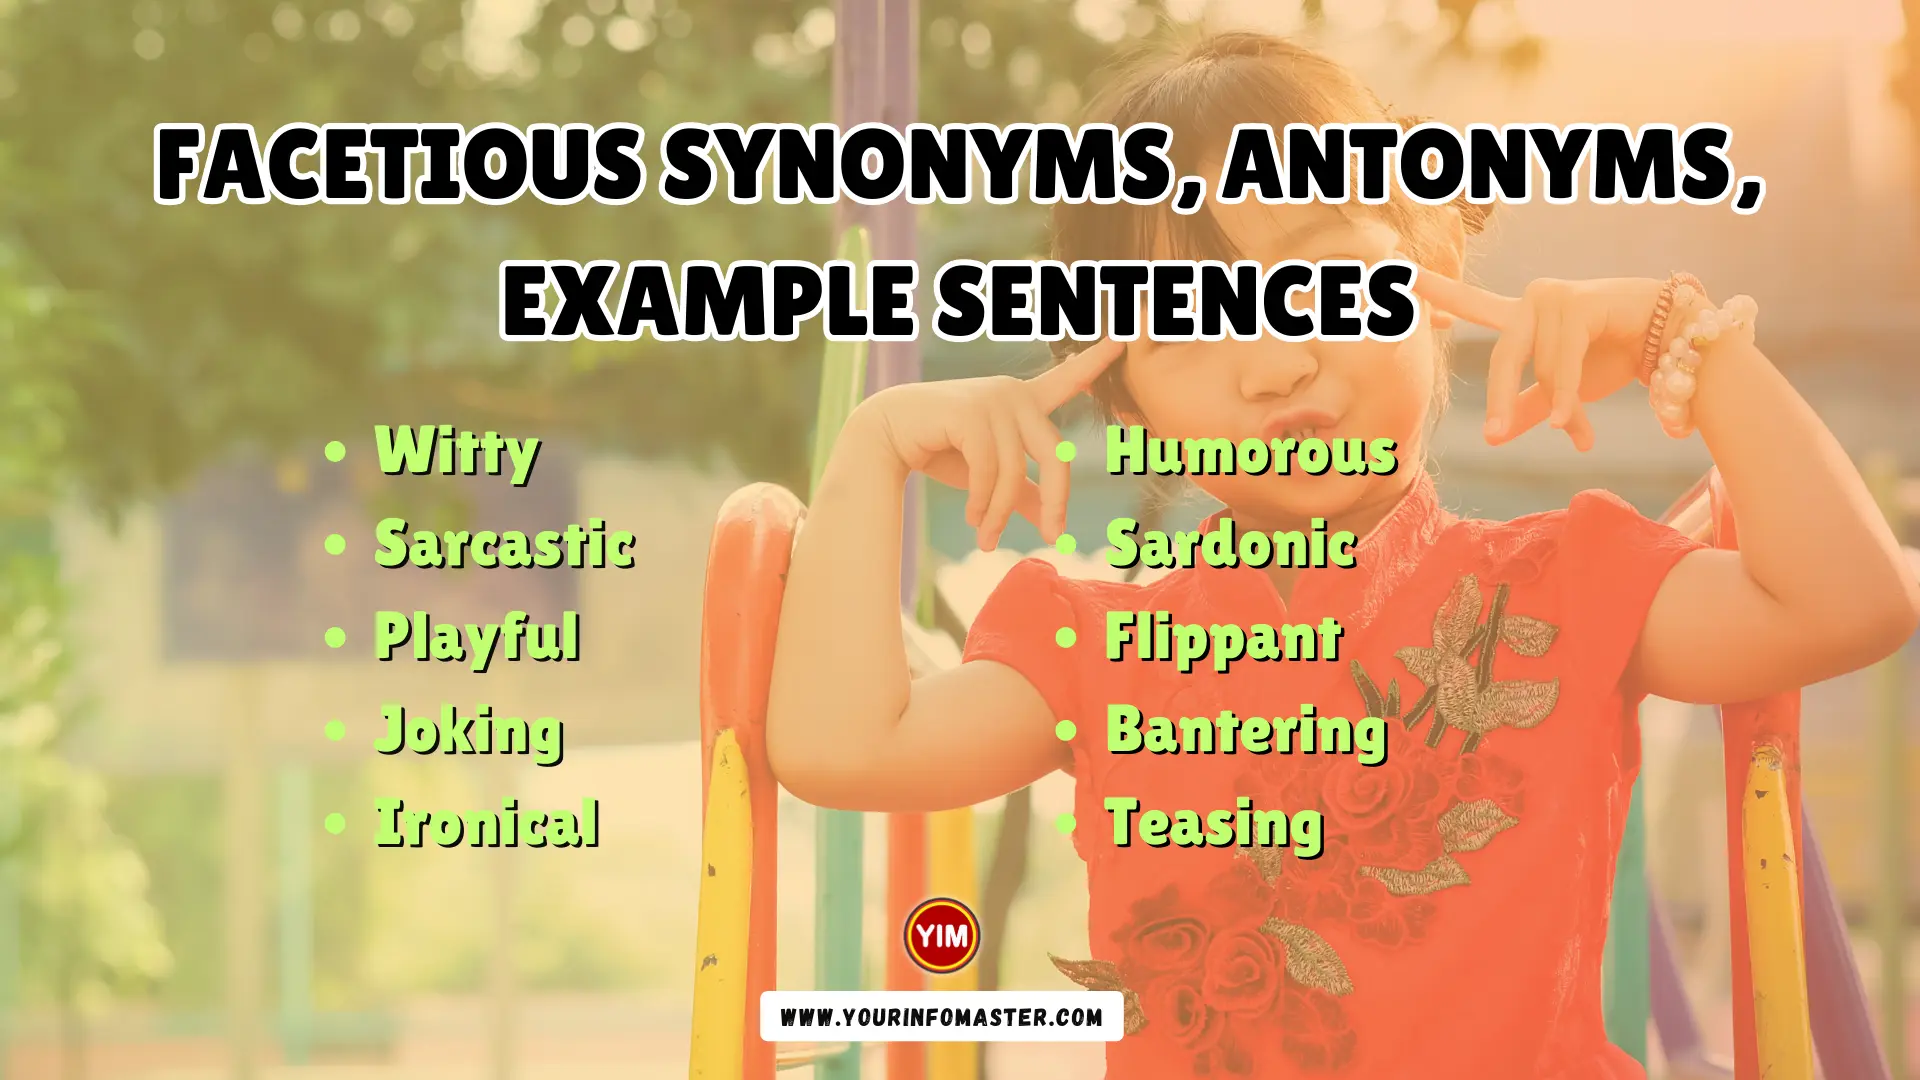 Facetious Synonyms, Antonyms, Example Sentences